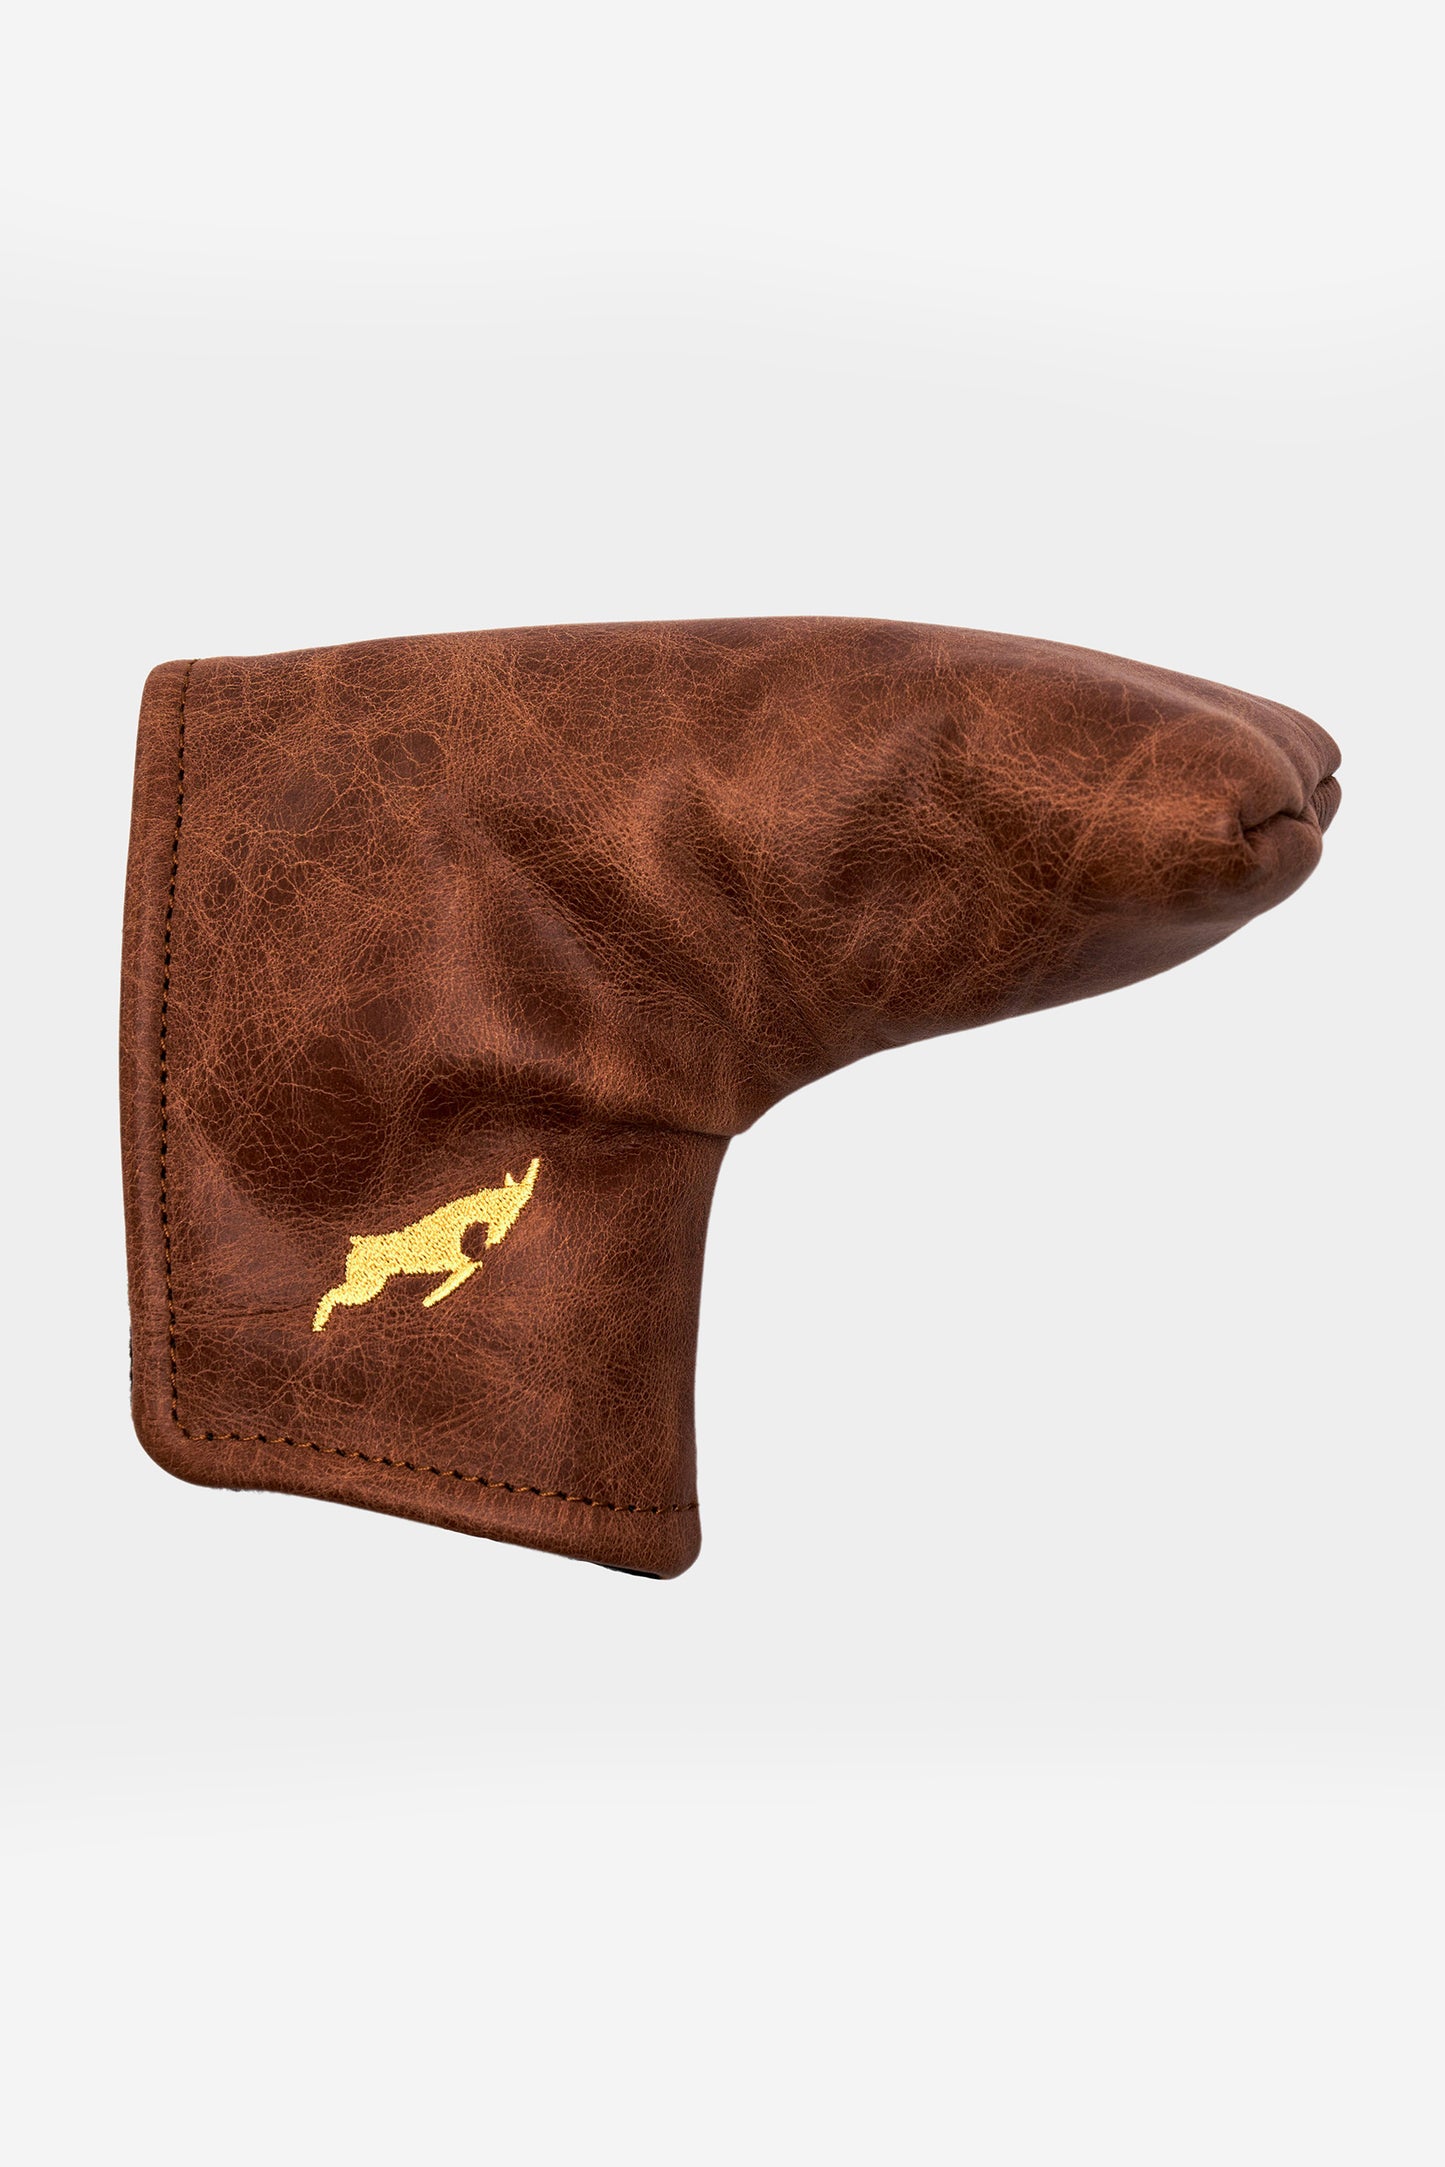 BROWN BLAD PUTTER COVER